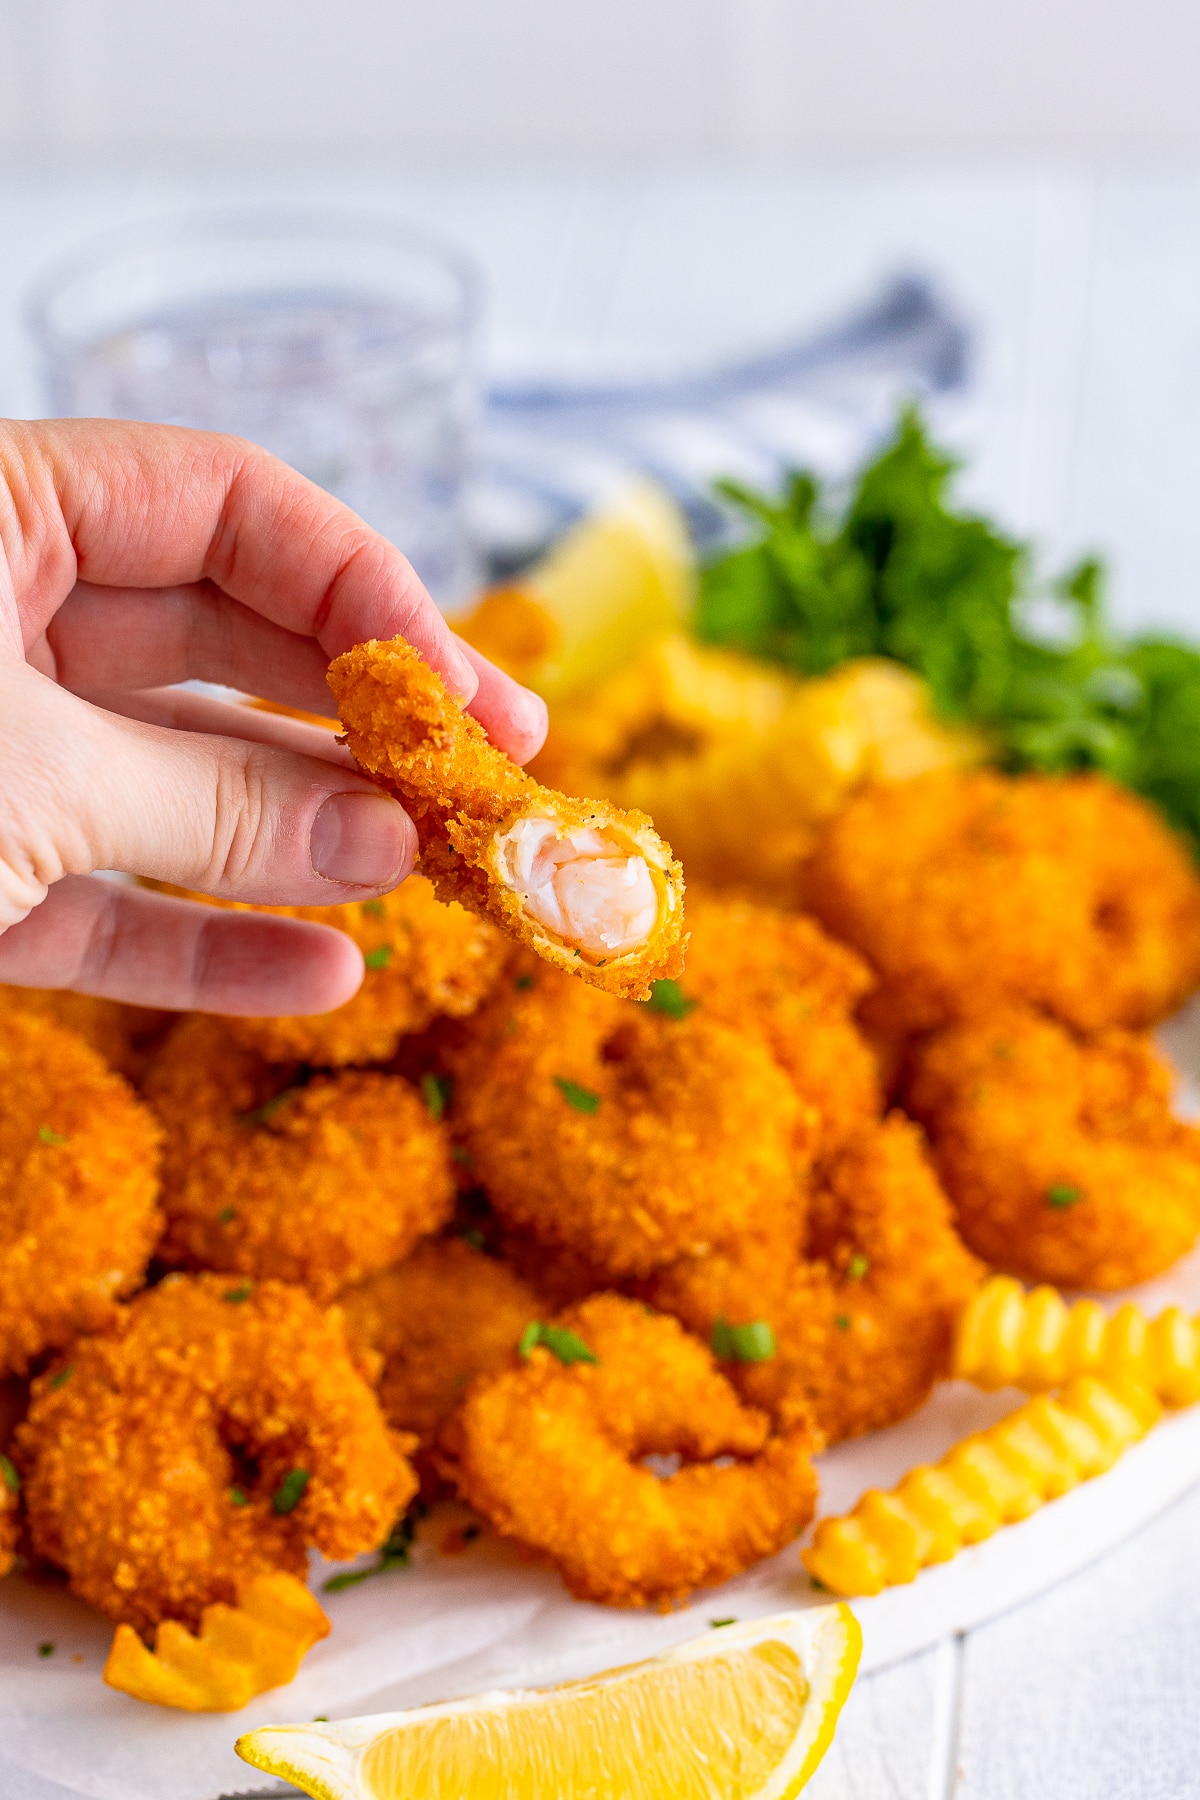 A hand holding a shrimp with a bite out of it to show the interior of panko shrimp